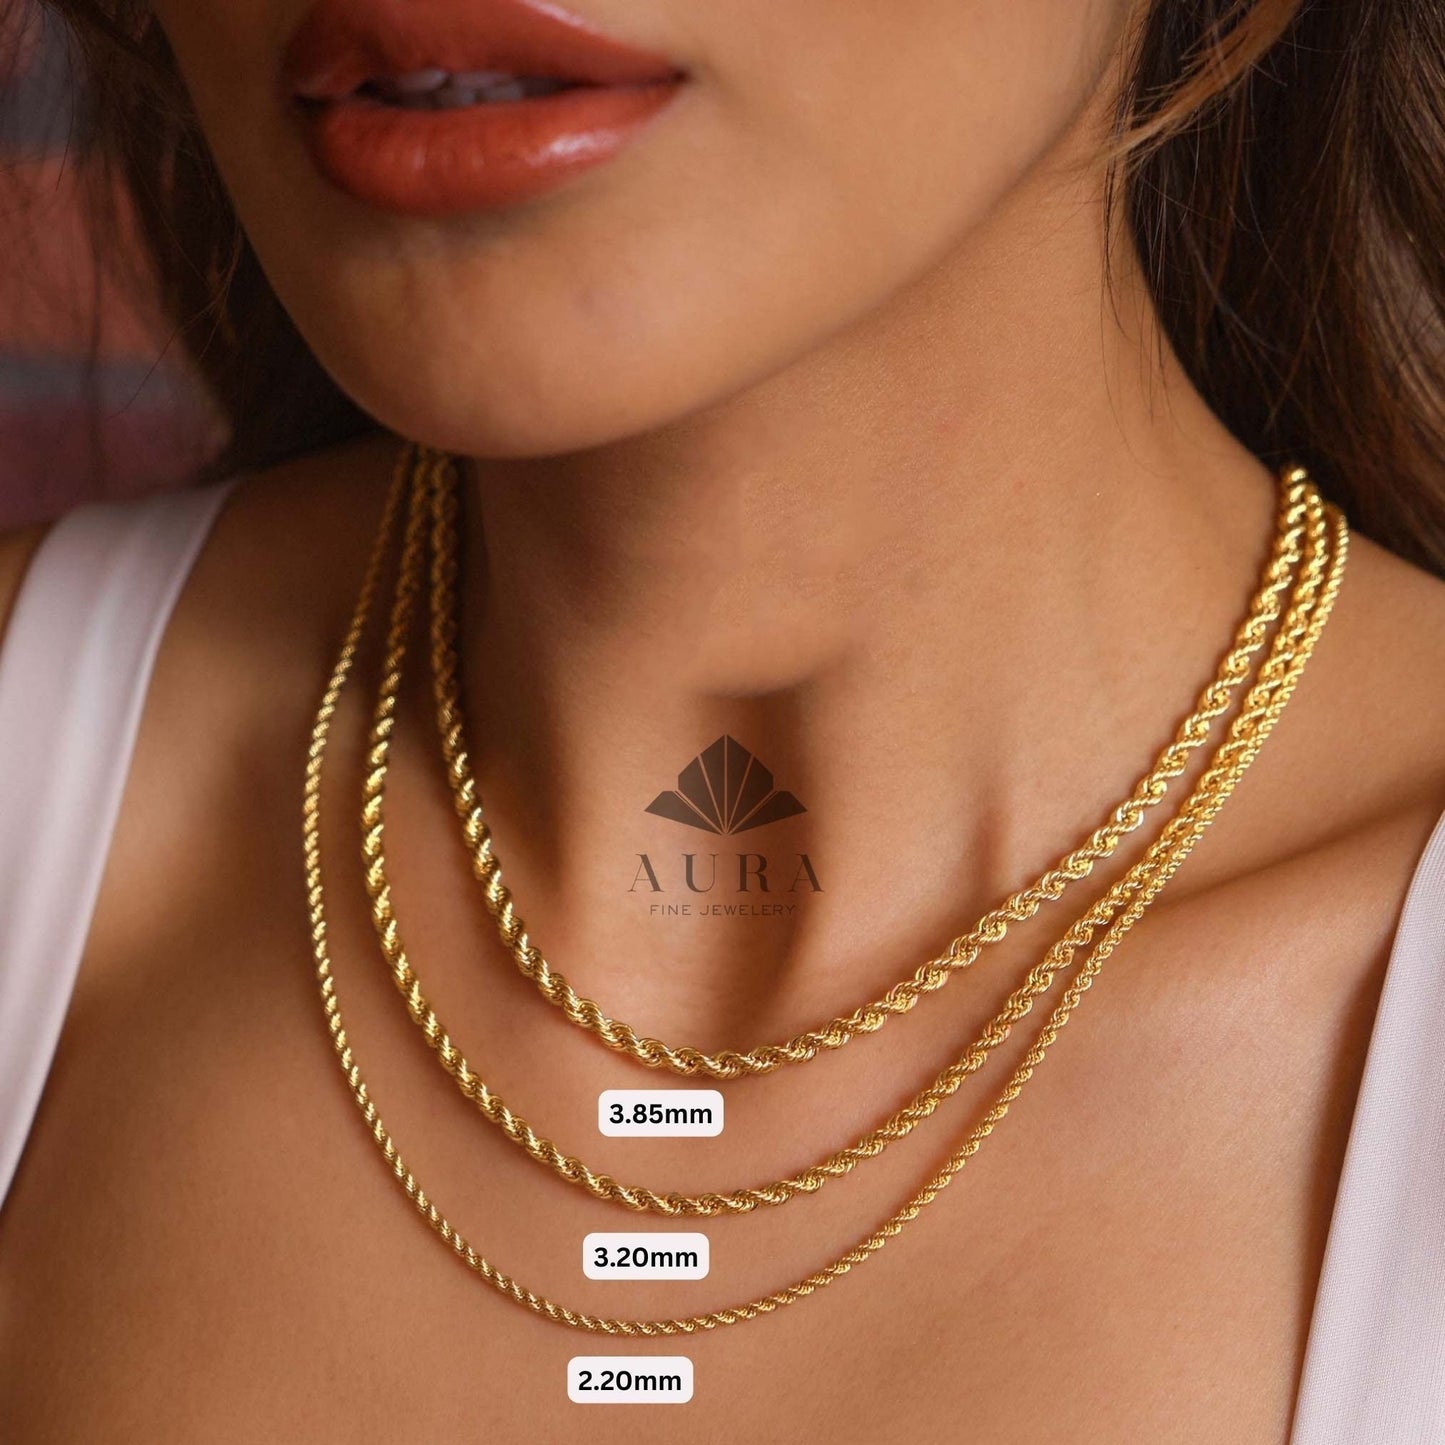 14K Gold Rope Chain Necklace 2mm,3mm, 4mm Diamond Cut Choker, Twisted Rope Necklace, Statement Choker, Dainty Necklace, Men Women Necklace,